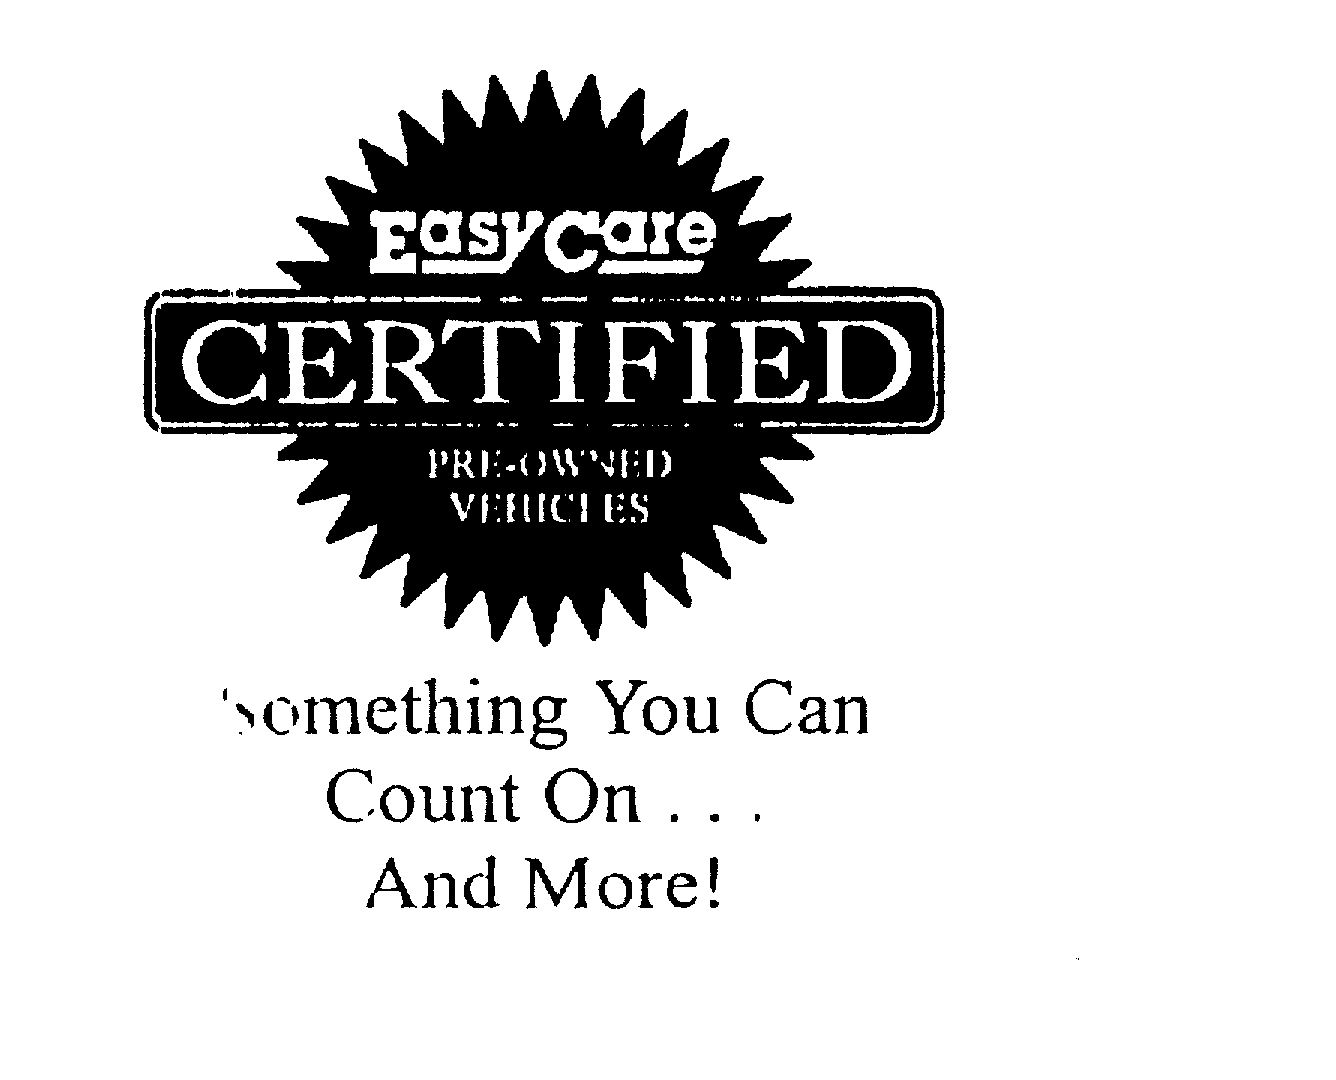  EASY CARE CERTIFIED PRE-OWNED VEHICLES SOMETHING YOU CAN COUNT ON ... AND MORE!